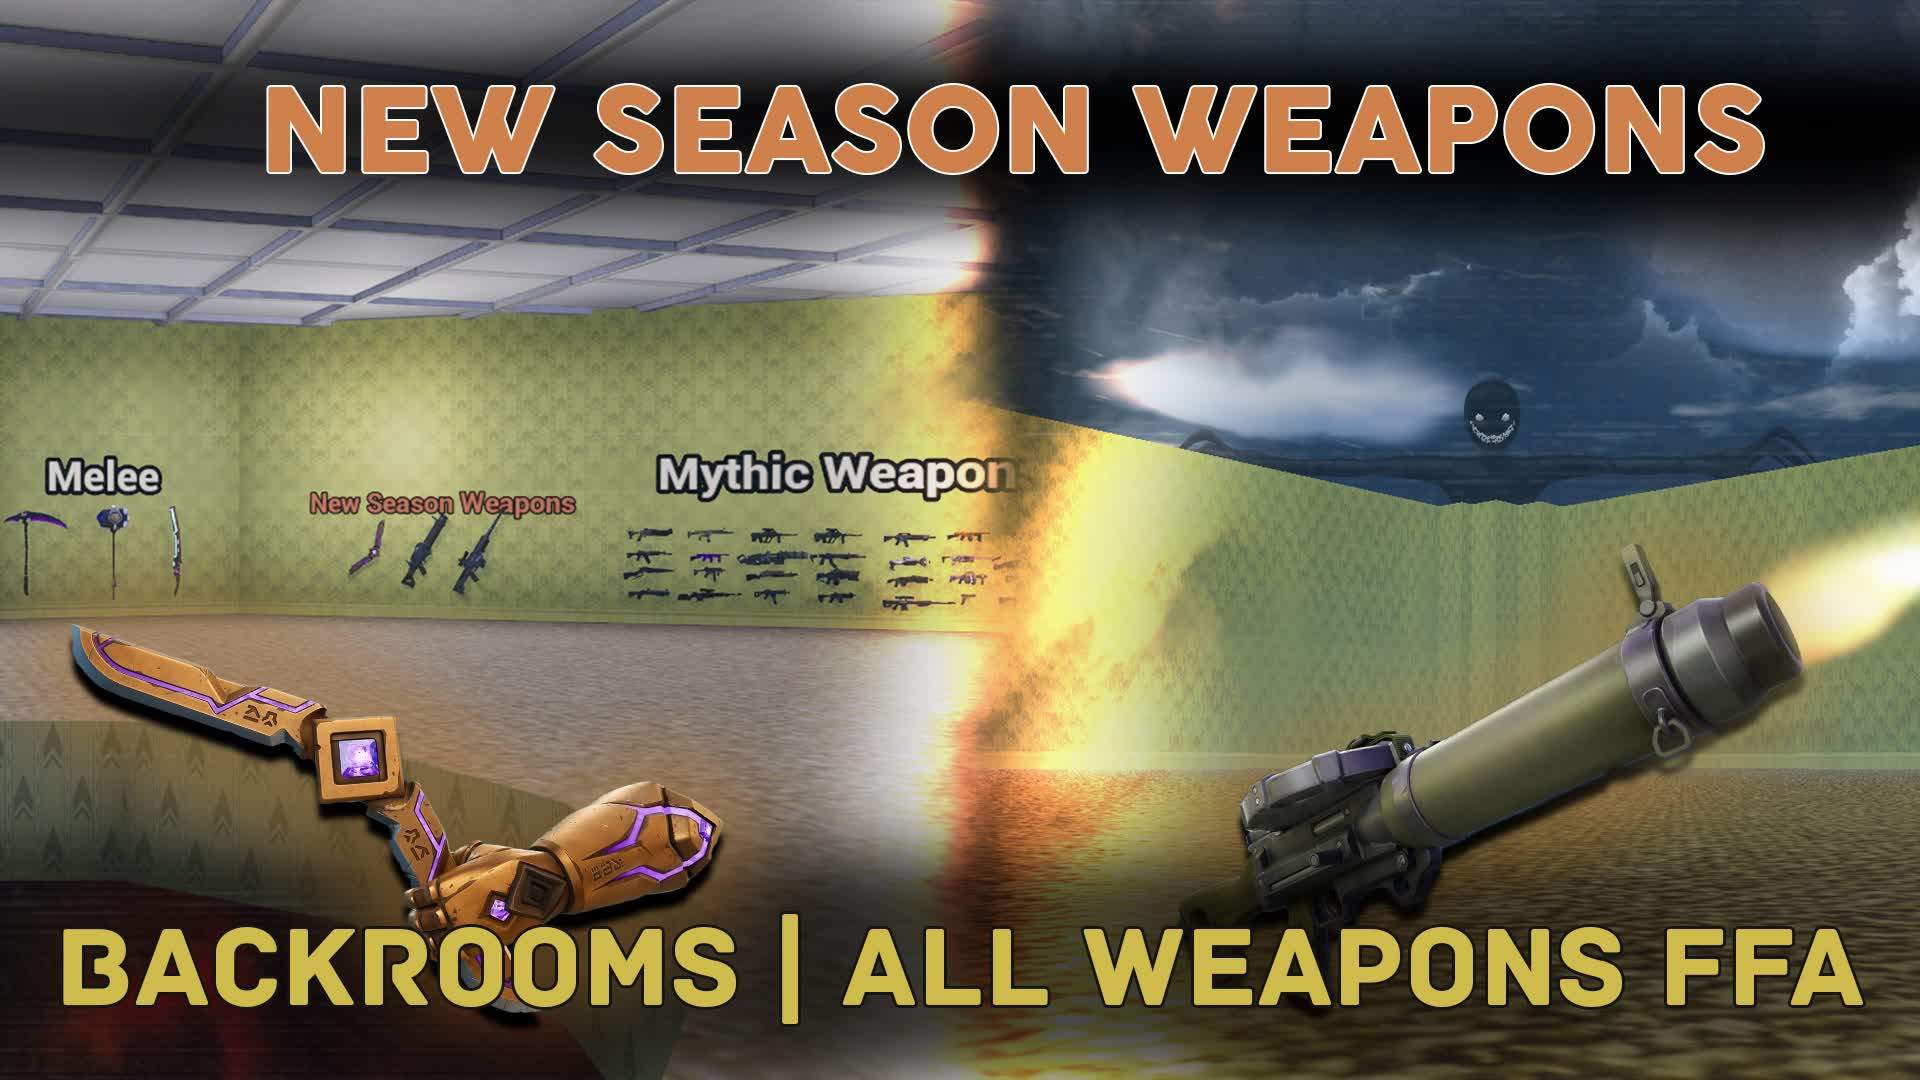 BACKROOMS | ALL WEAPONS - FREE FOR ALL